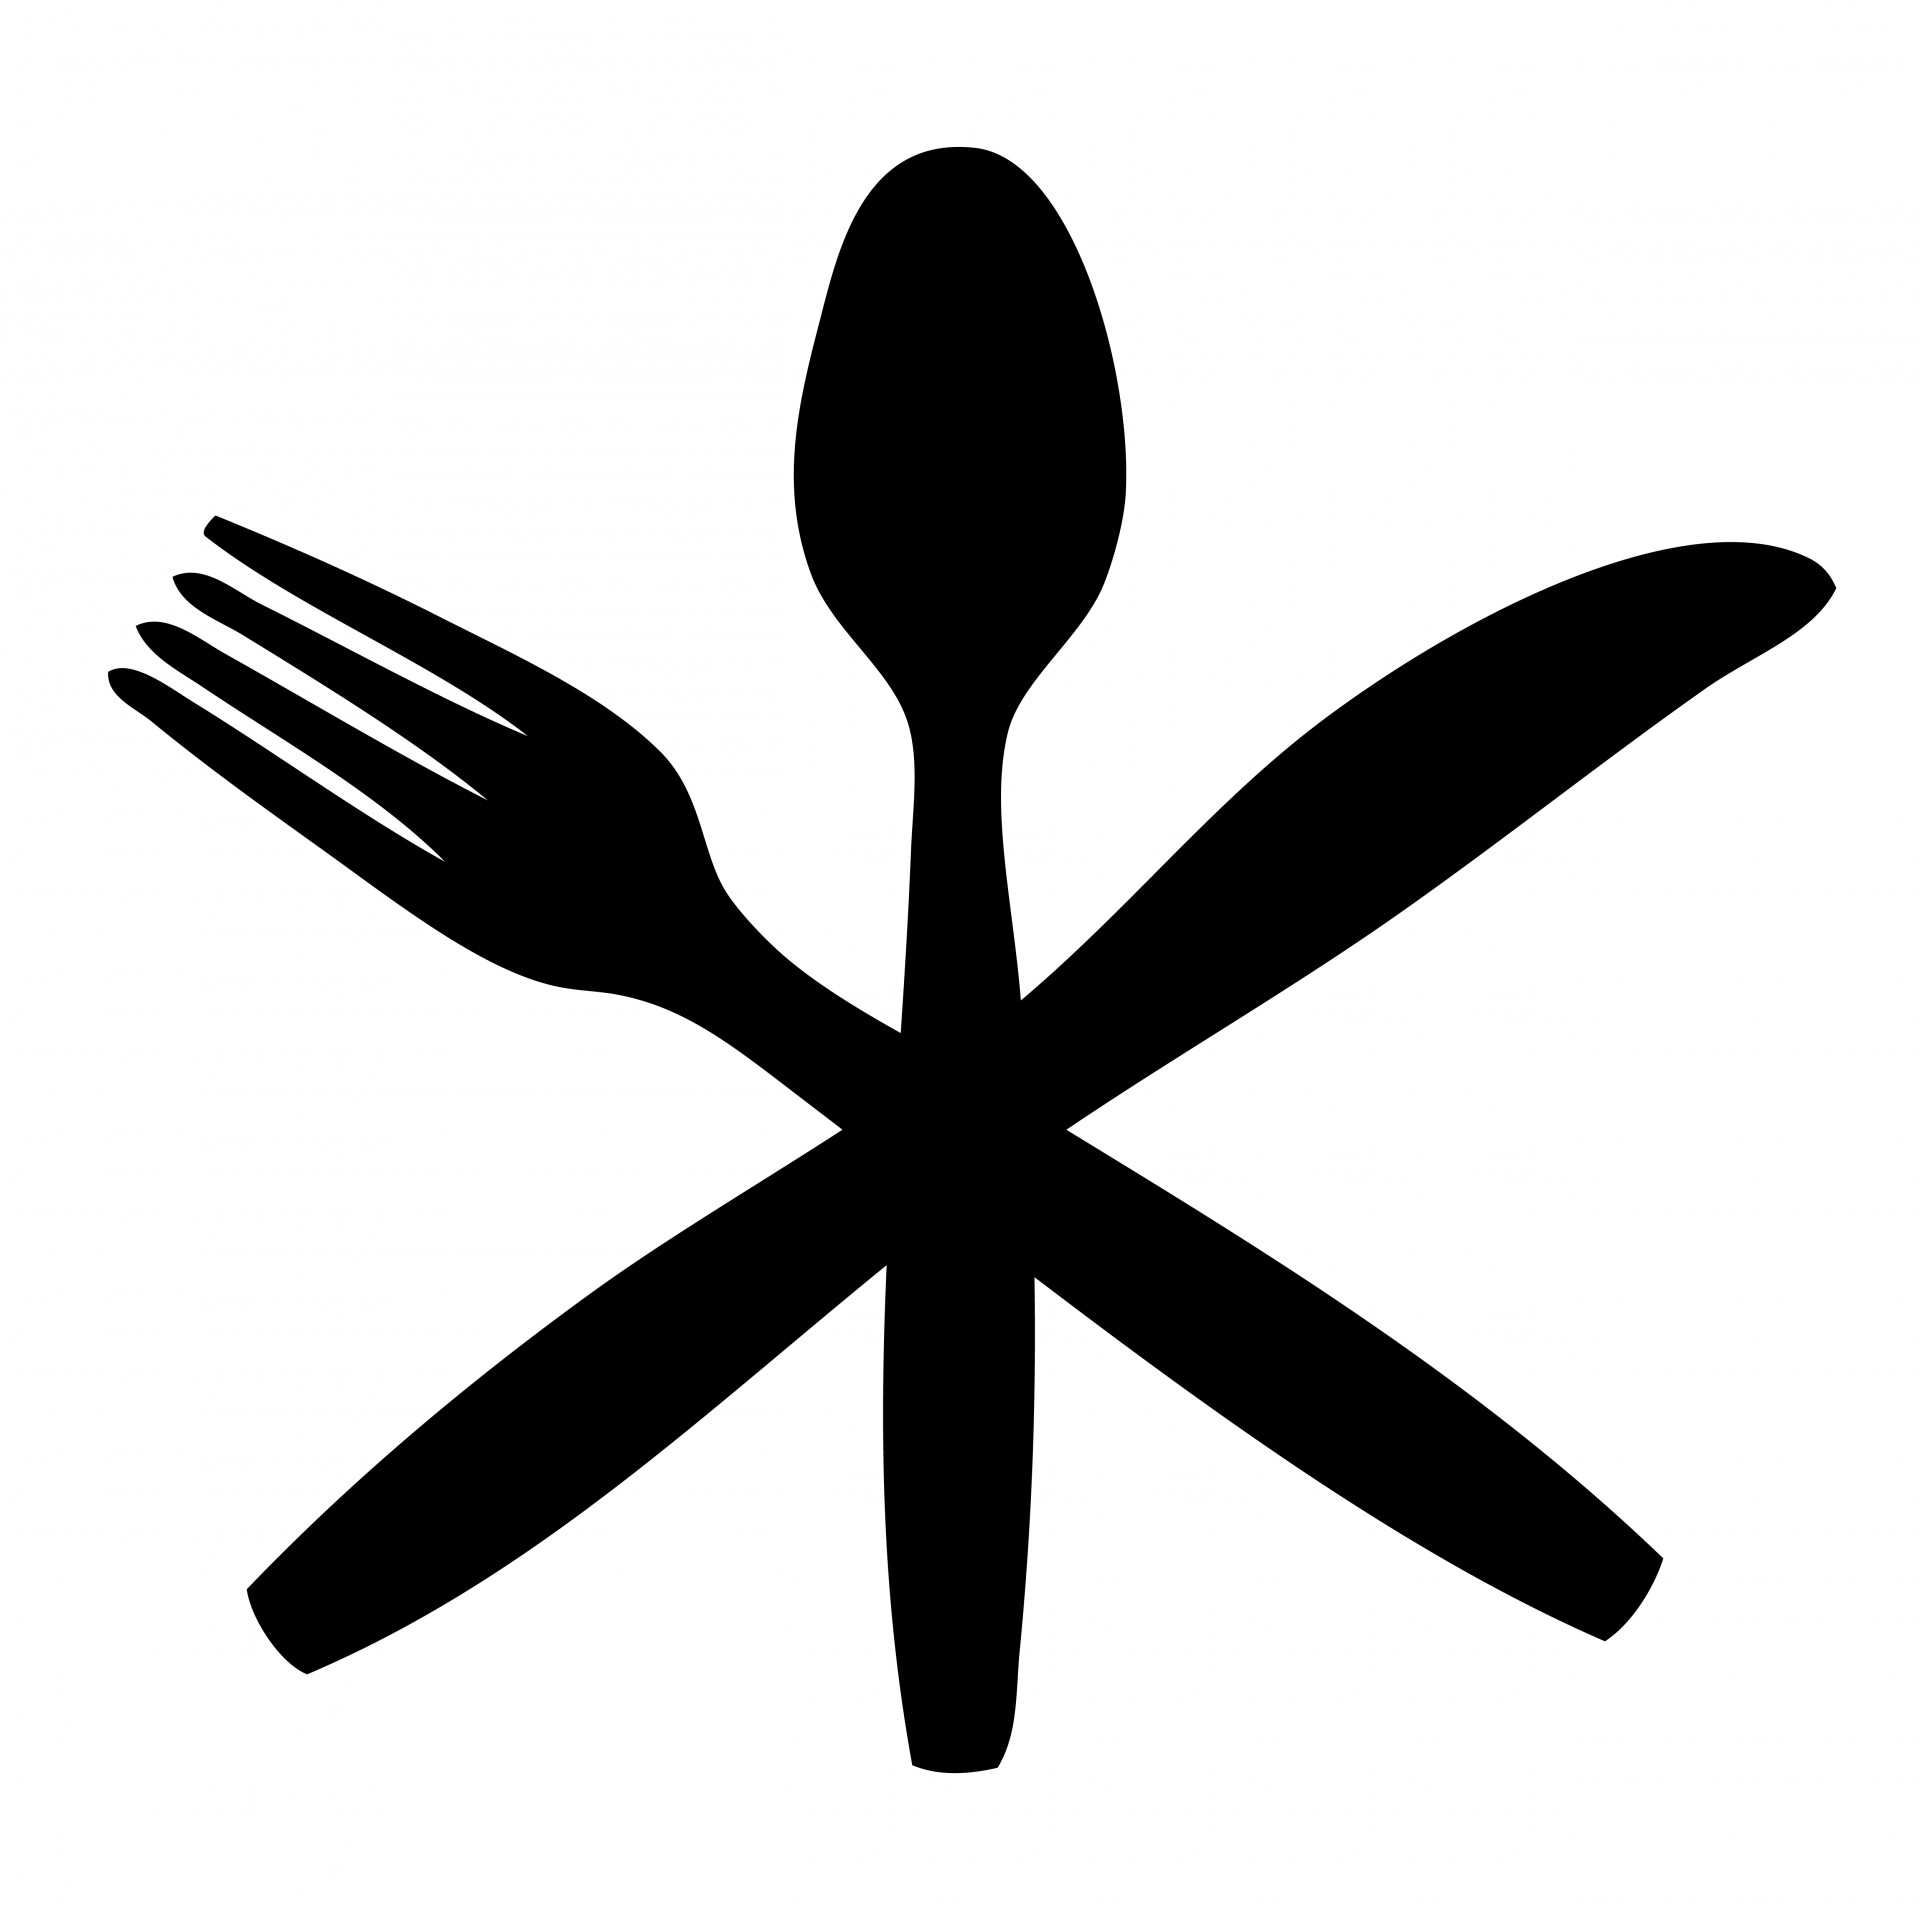 Cutlery logo free stock. Catering clipart knife fork